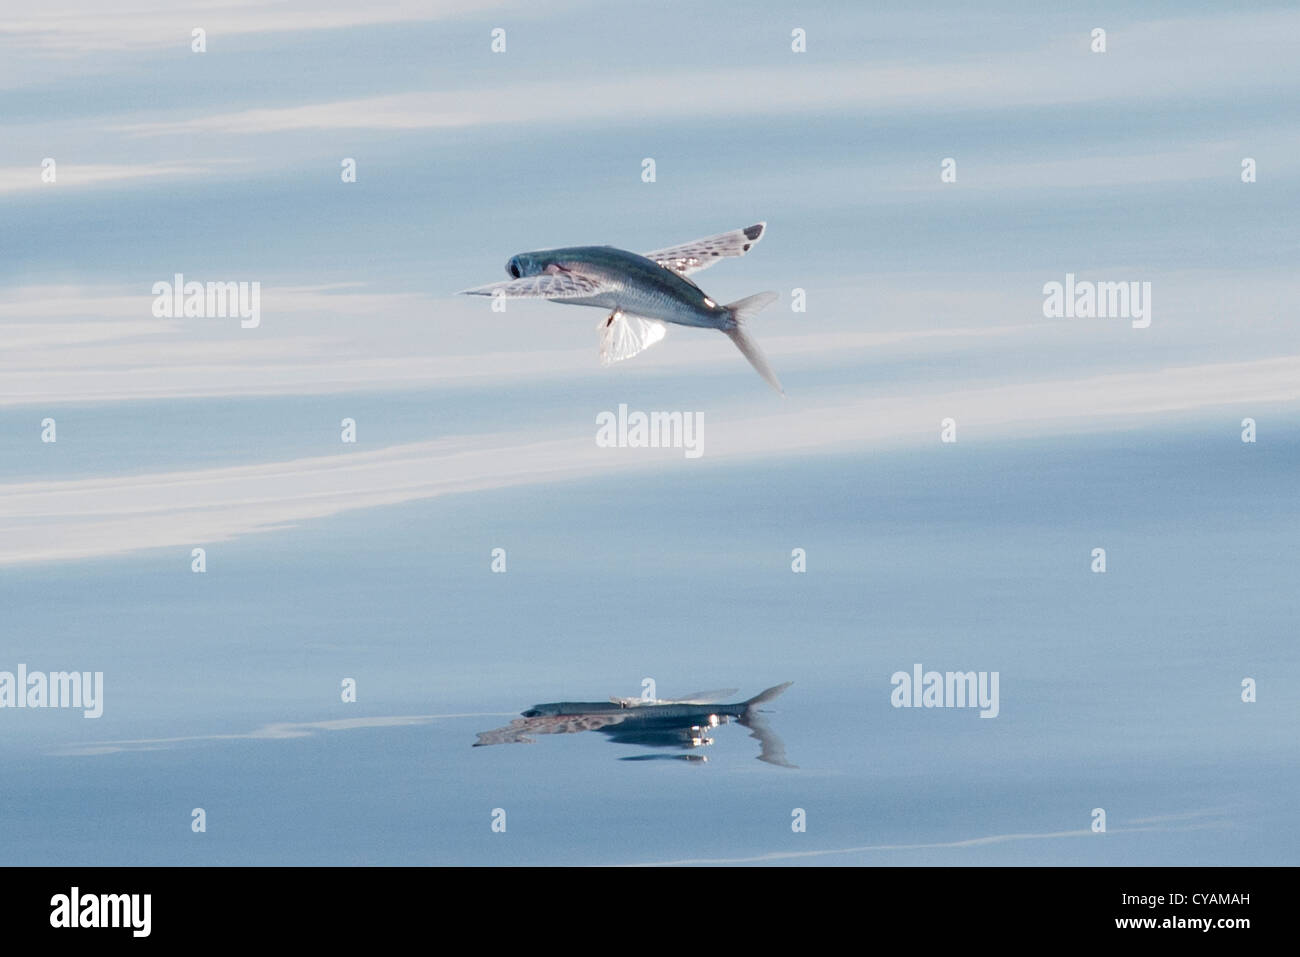 Flying Fish Species (scientific name unknown) with reflection